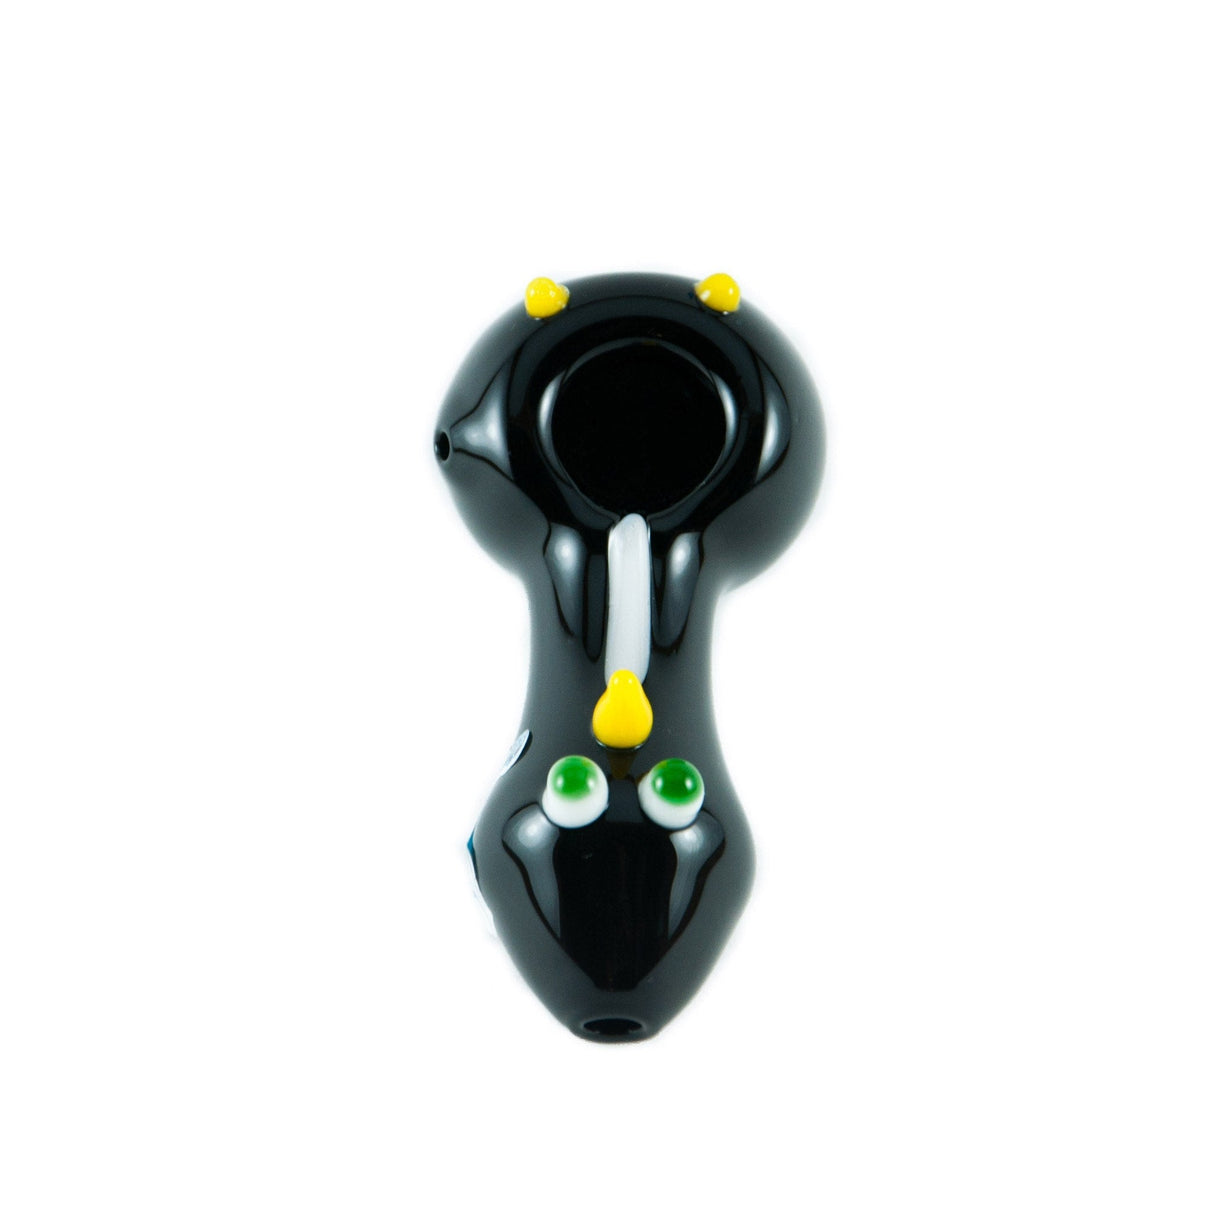 Chameleon Glass Chilly Willy hand pipe, black with yellow accents, top view, on white background